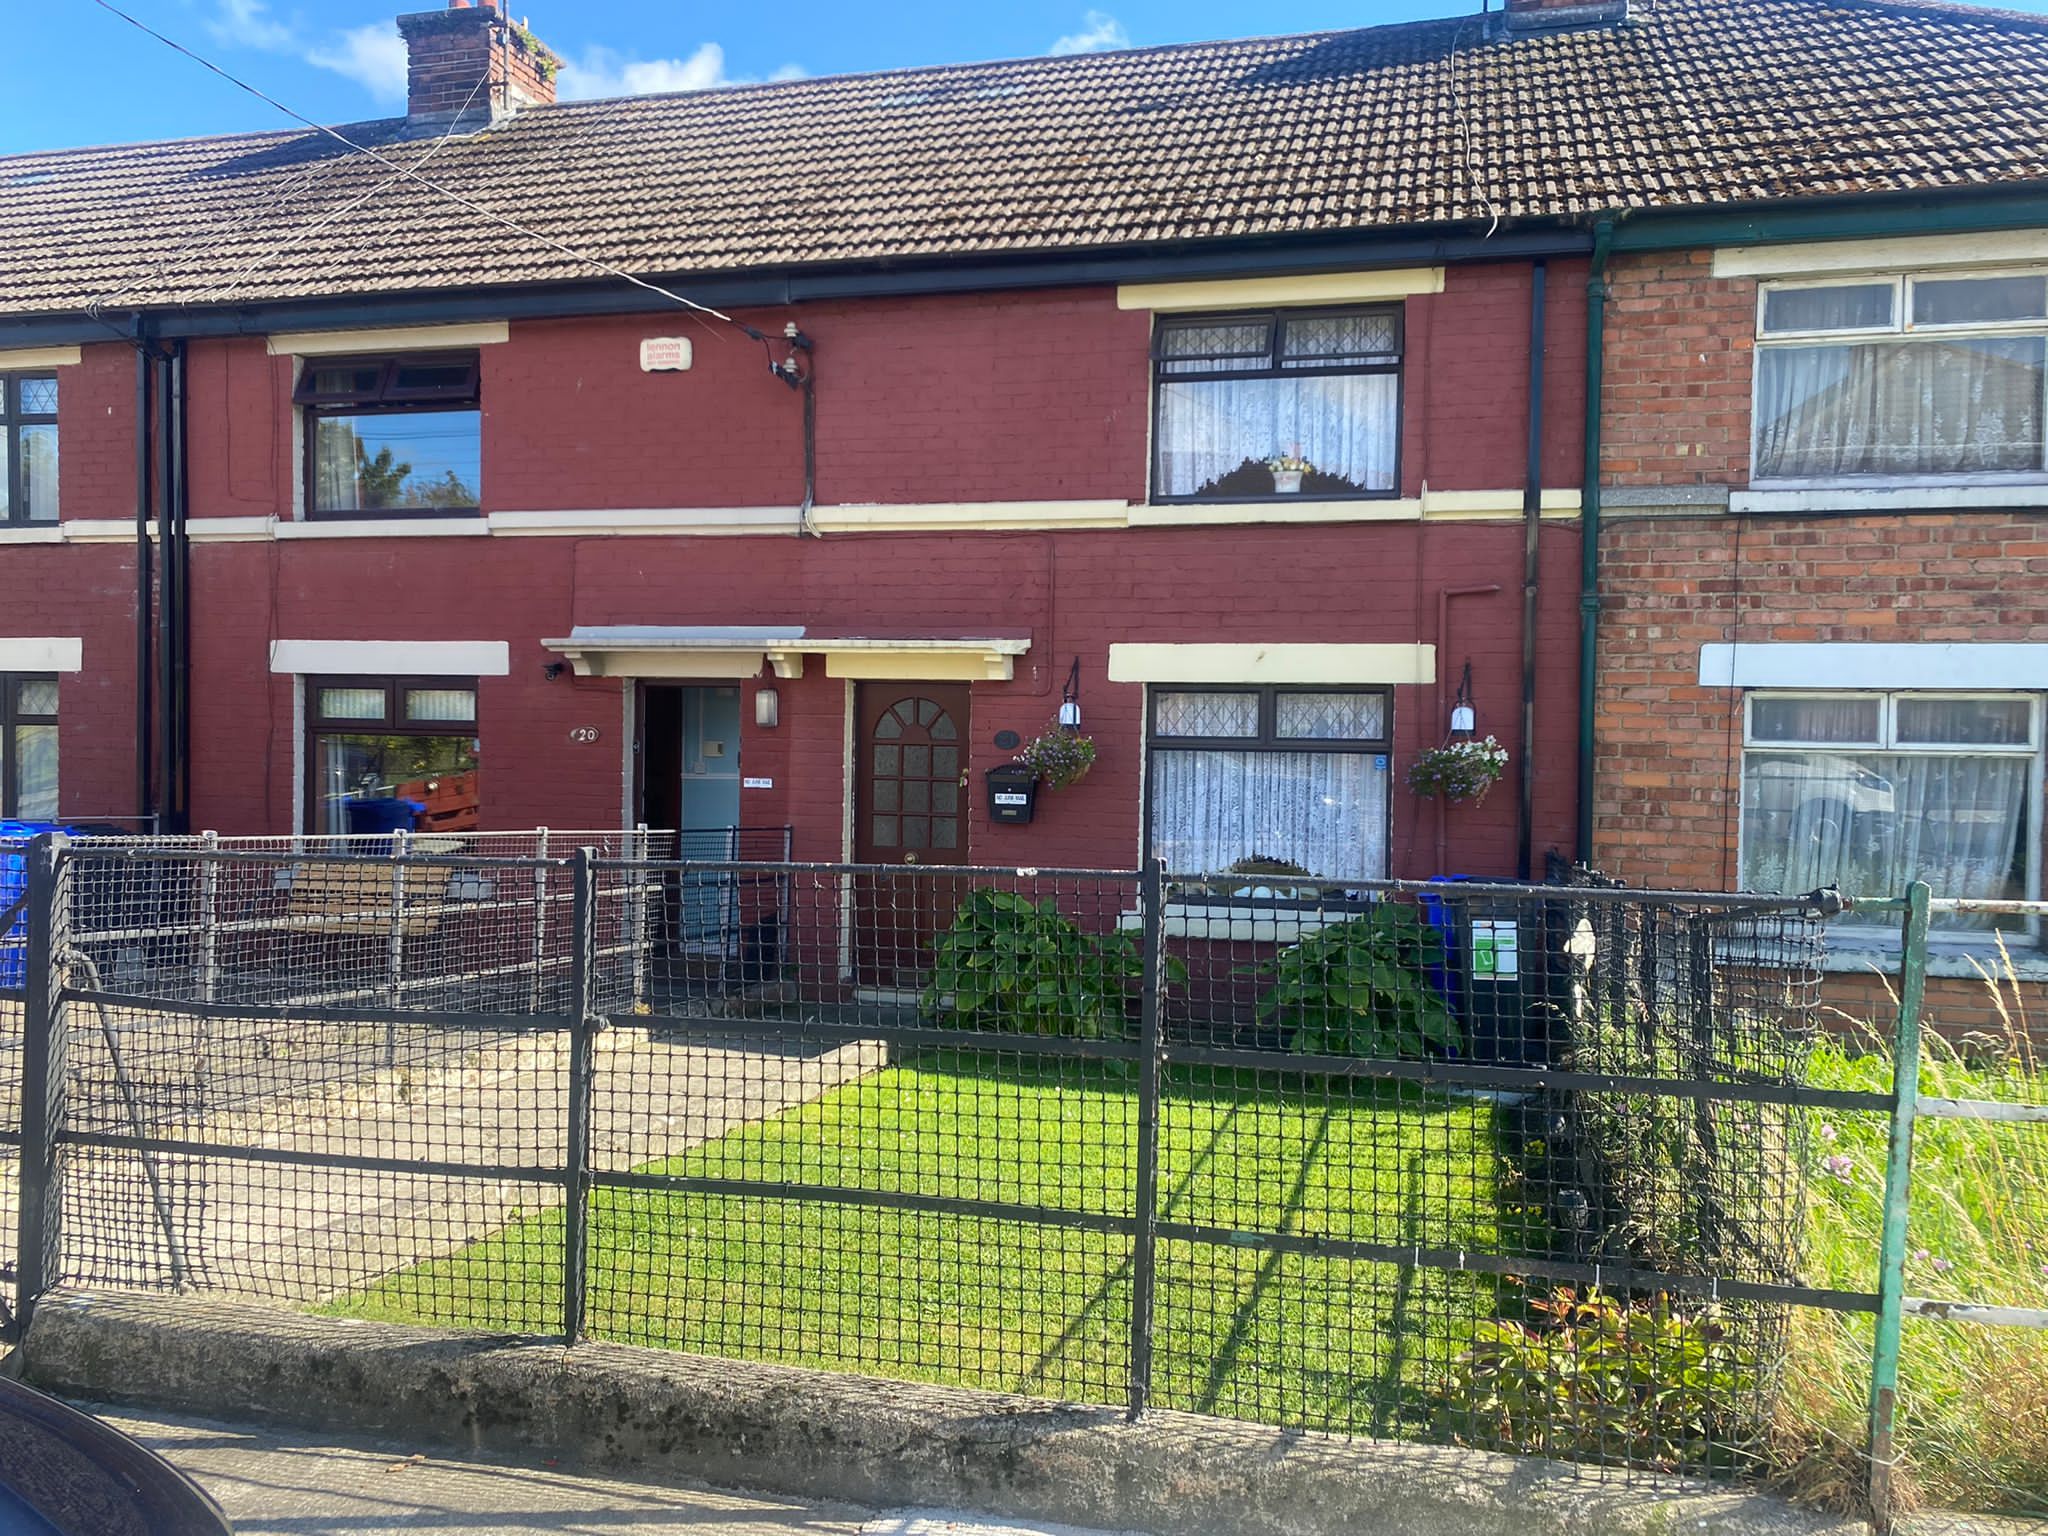 21 Pearse Park, Drogheda, Co Louth